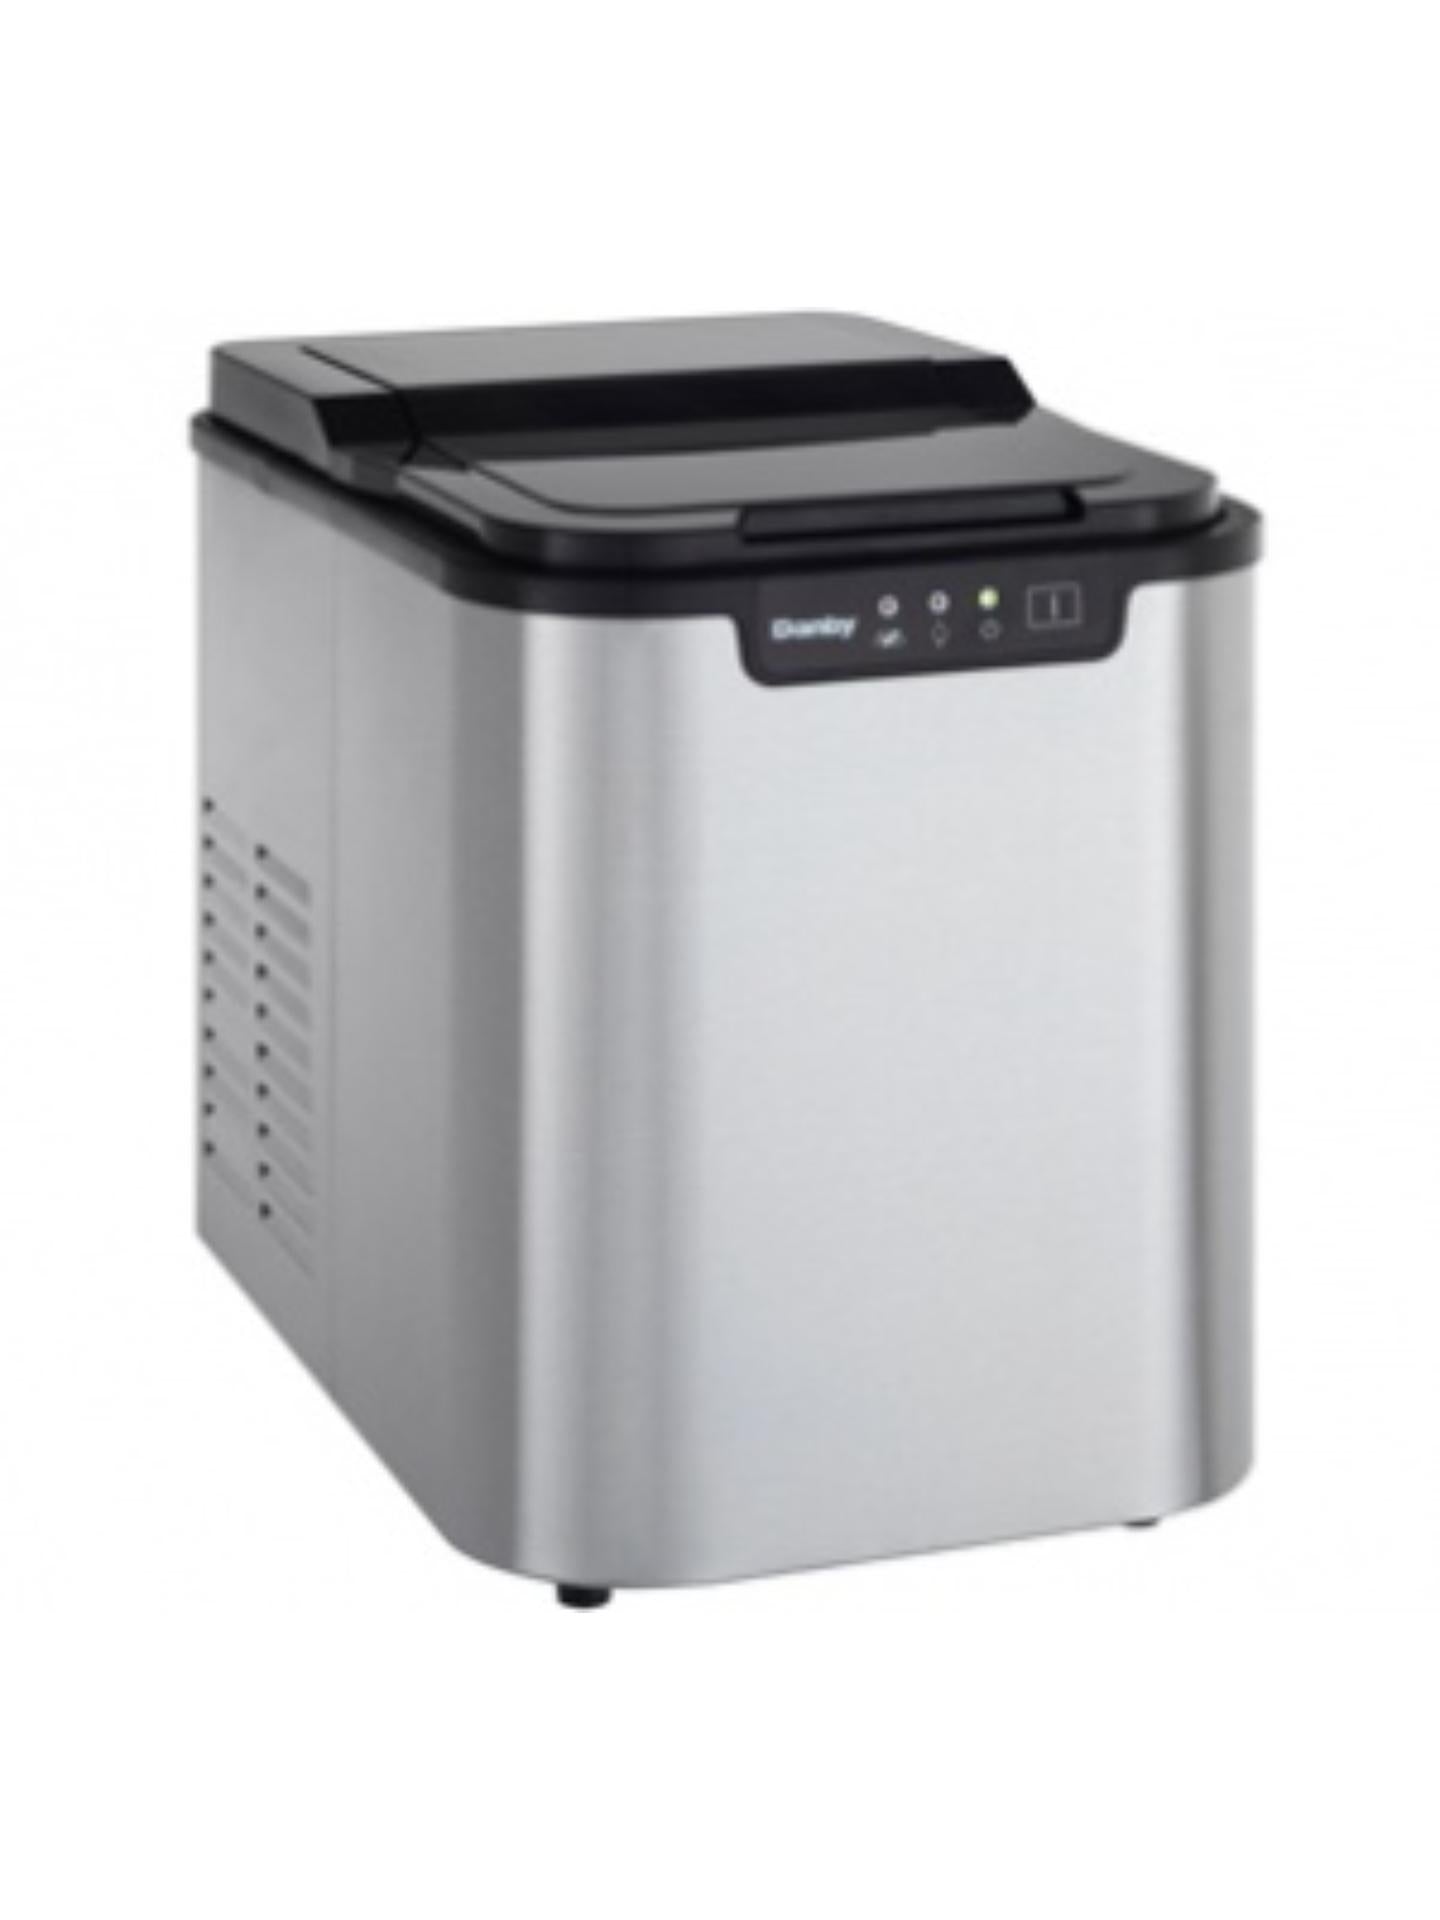 Danby 25 lbs. Countertop Ice Maker in Stainless Steel